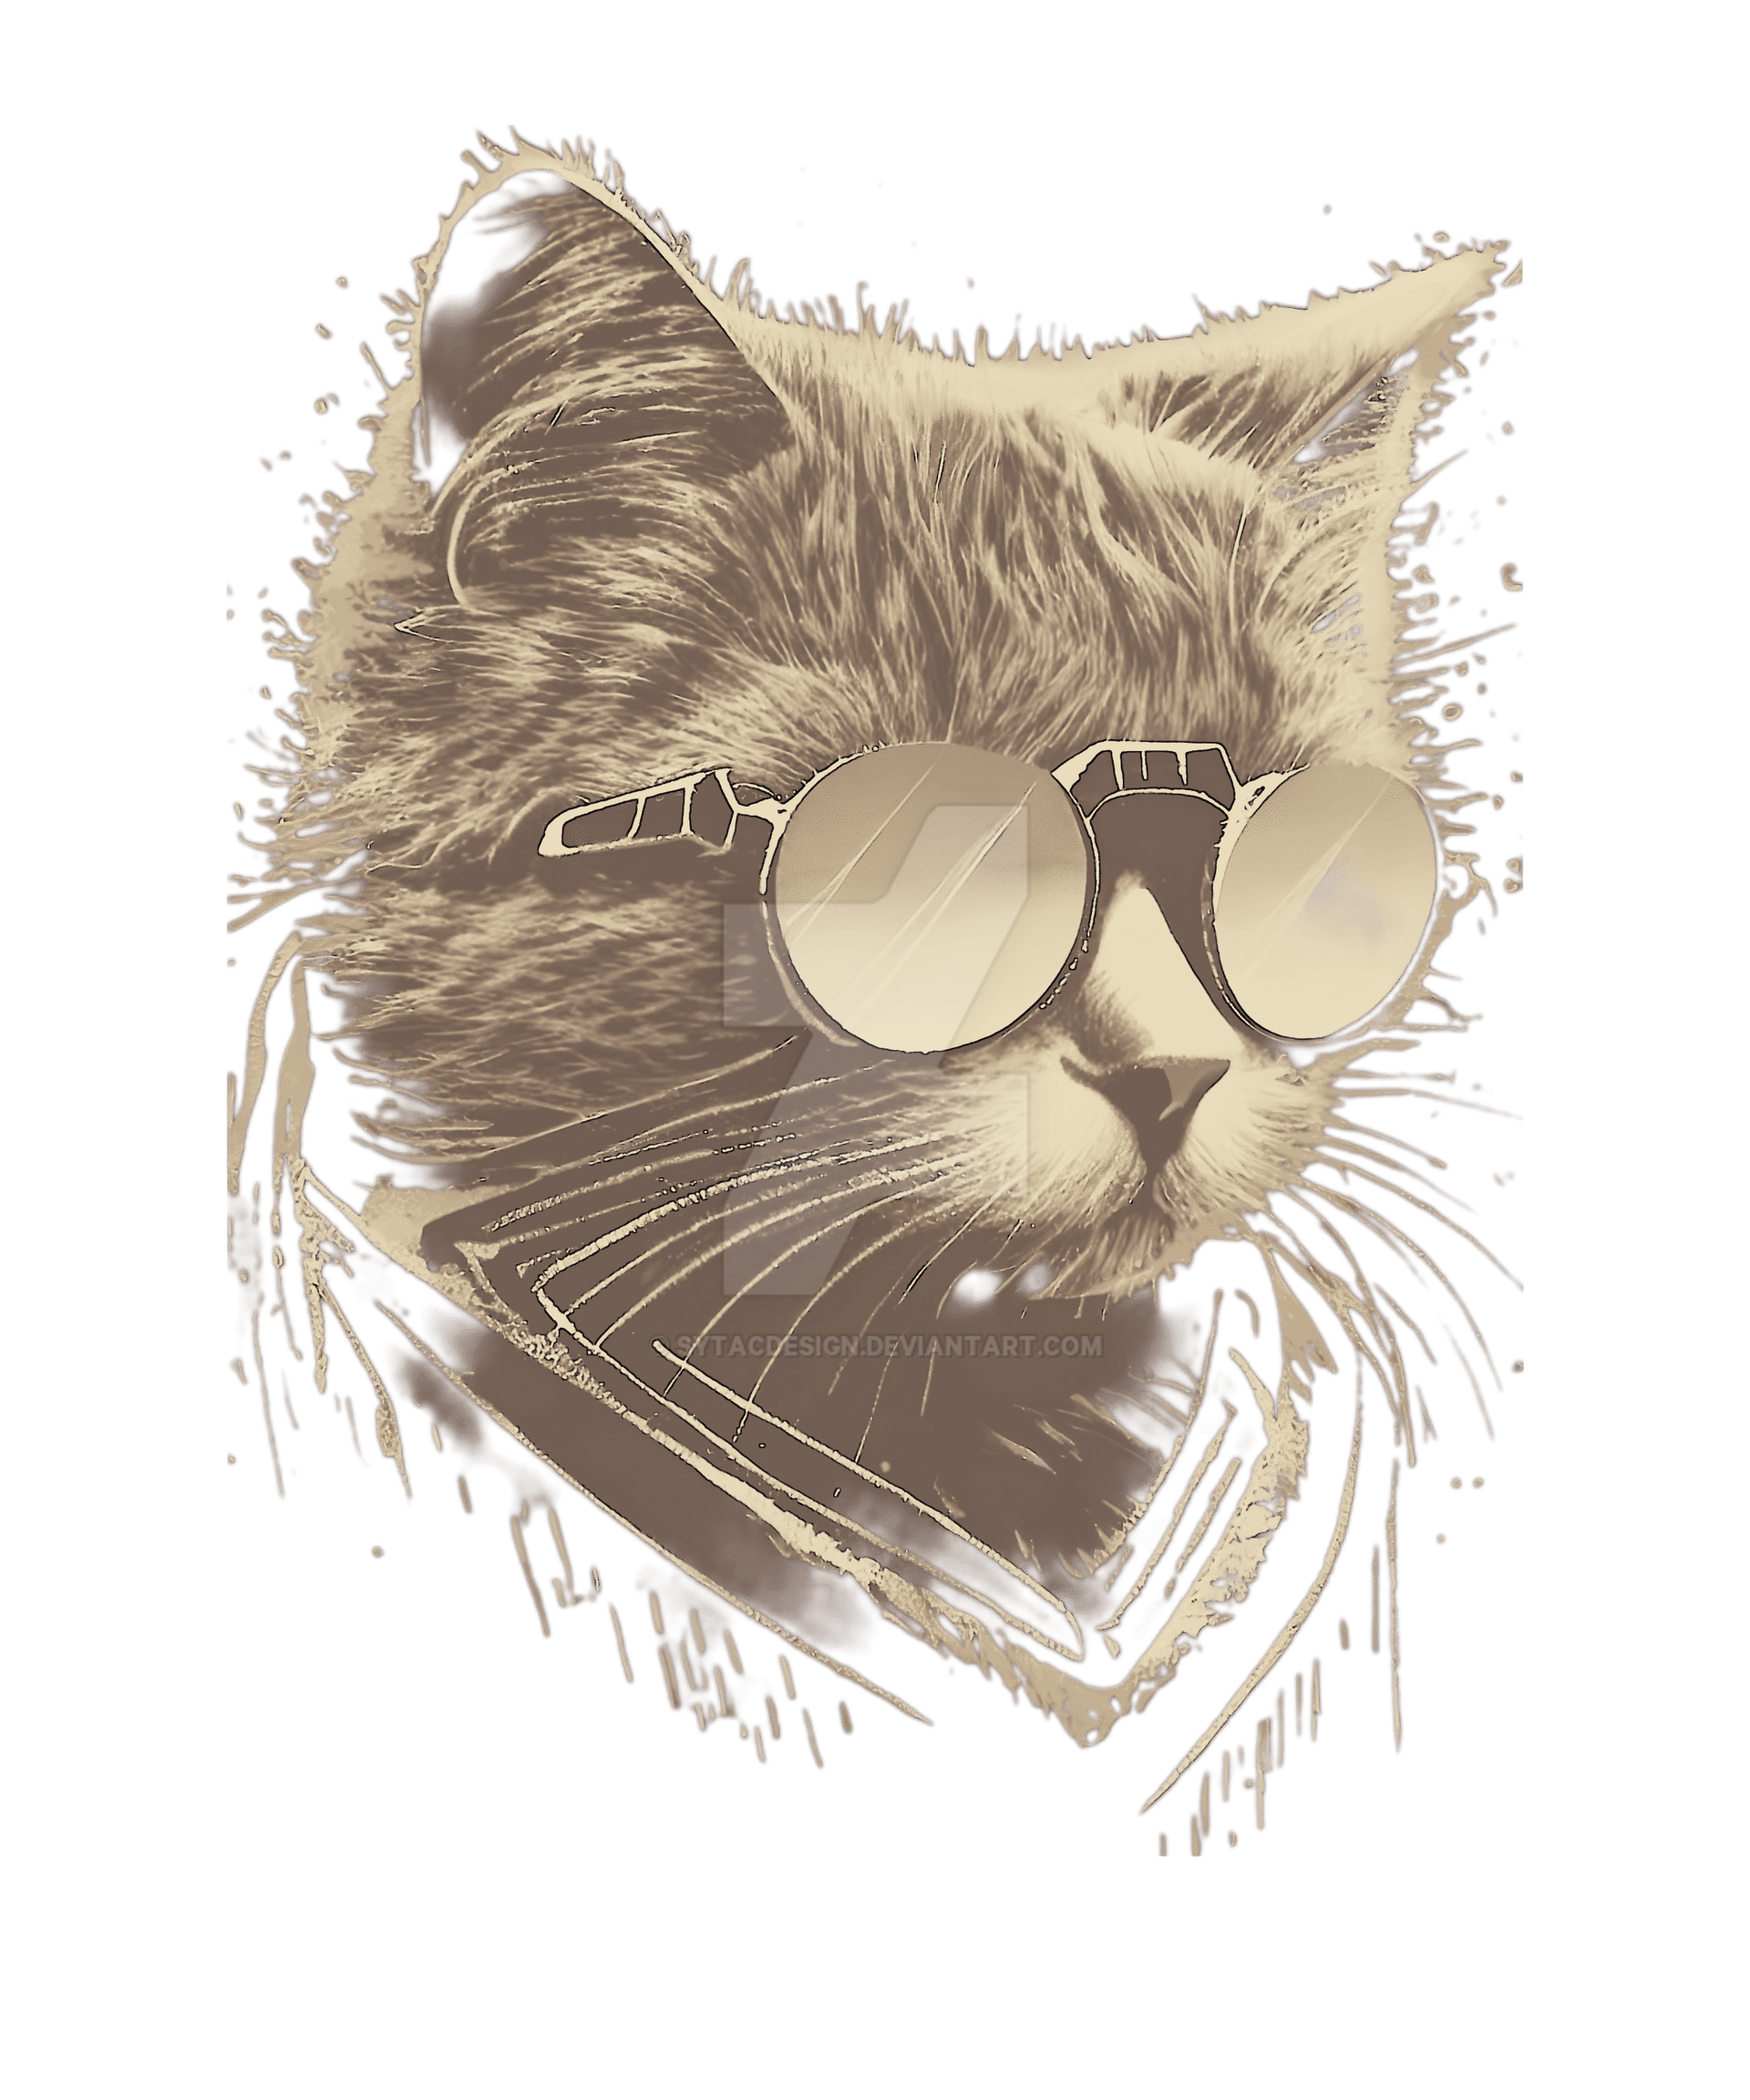 Hip Sunglasses Cat Kitty Cool design by sytacdesign on DeviantArt